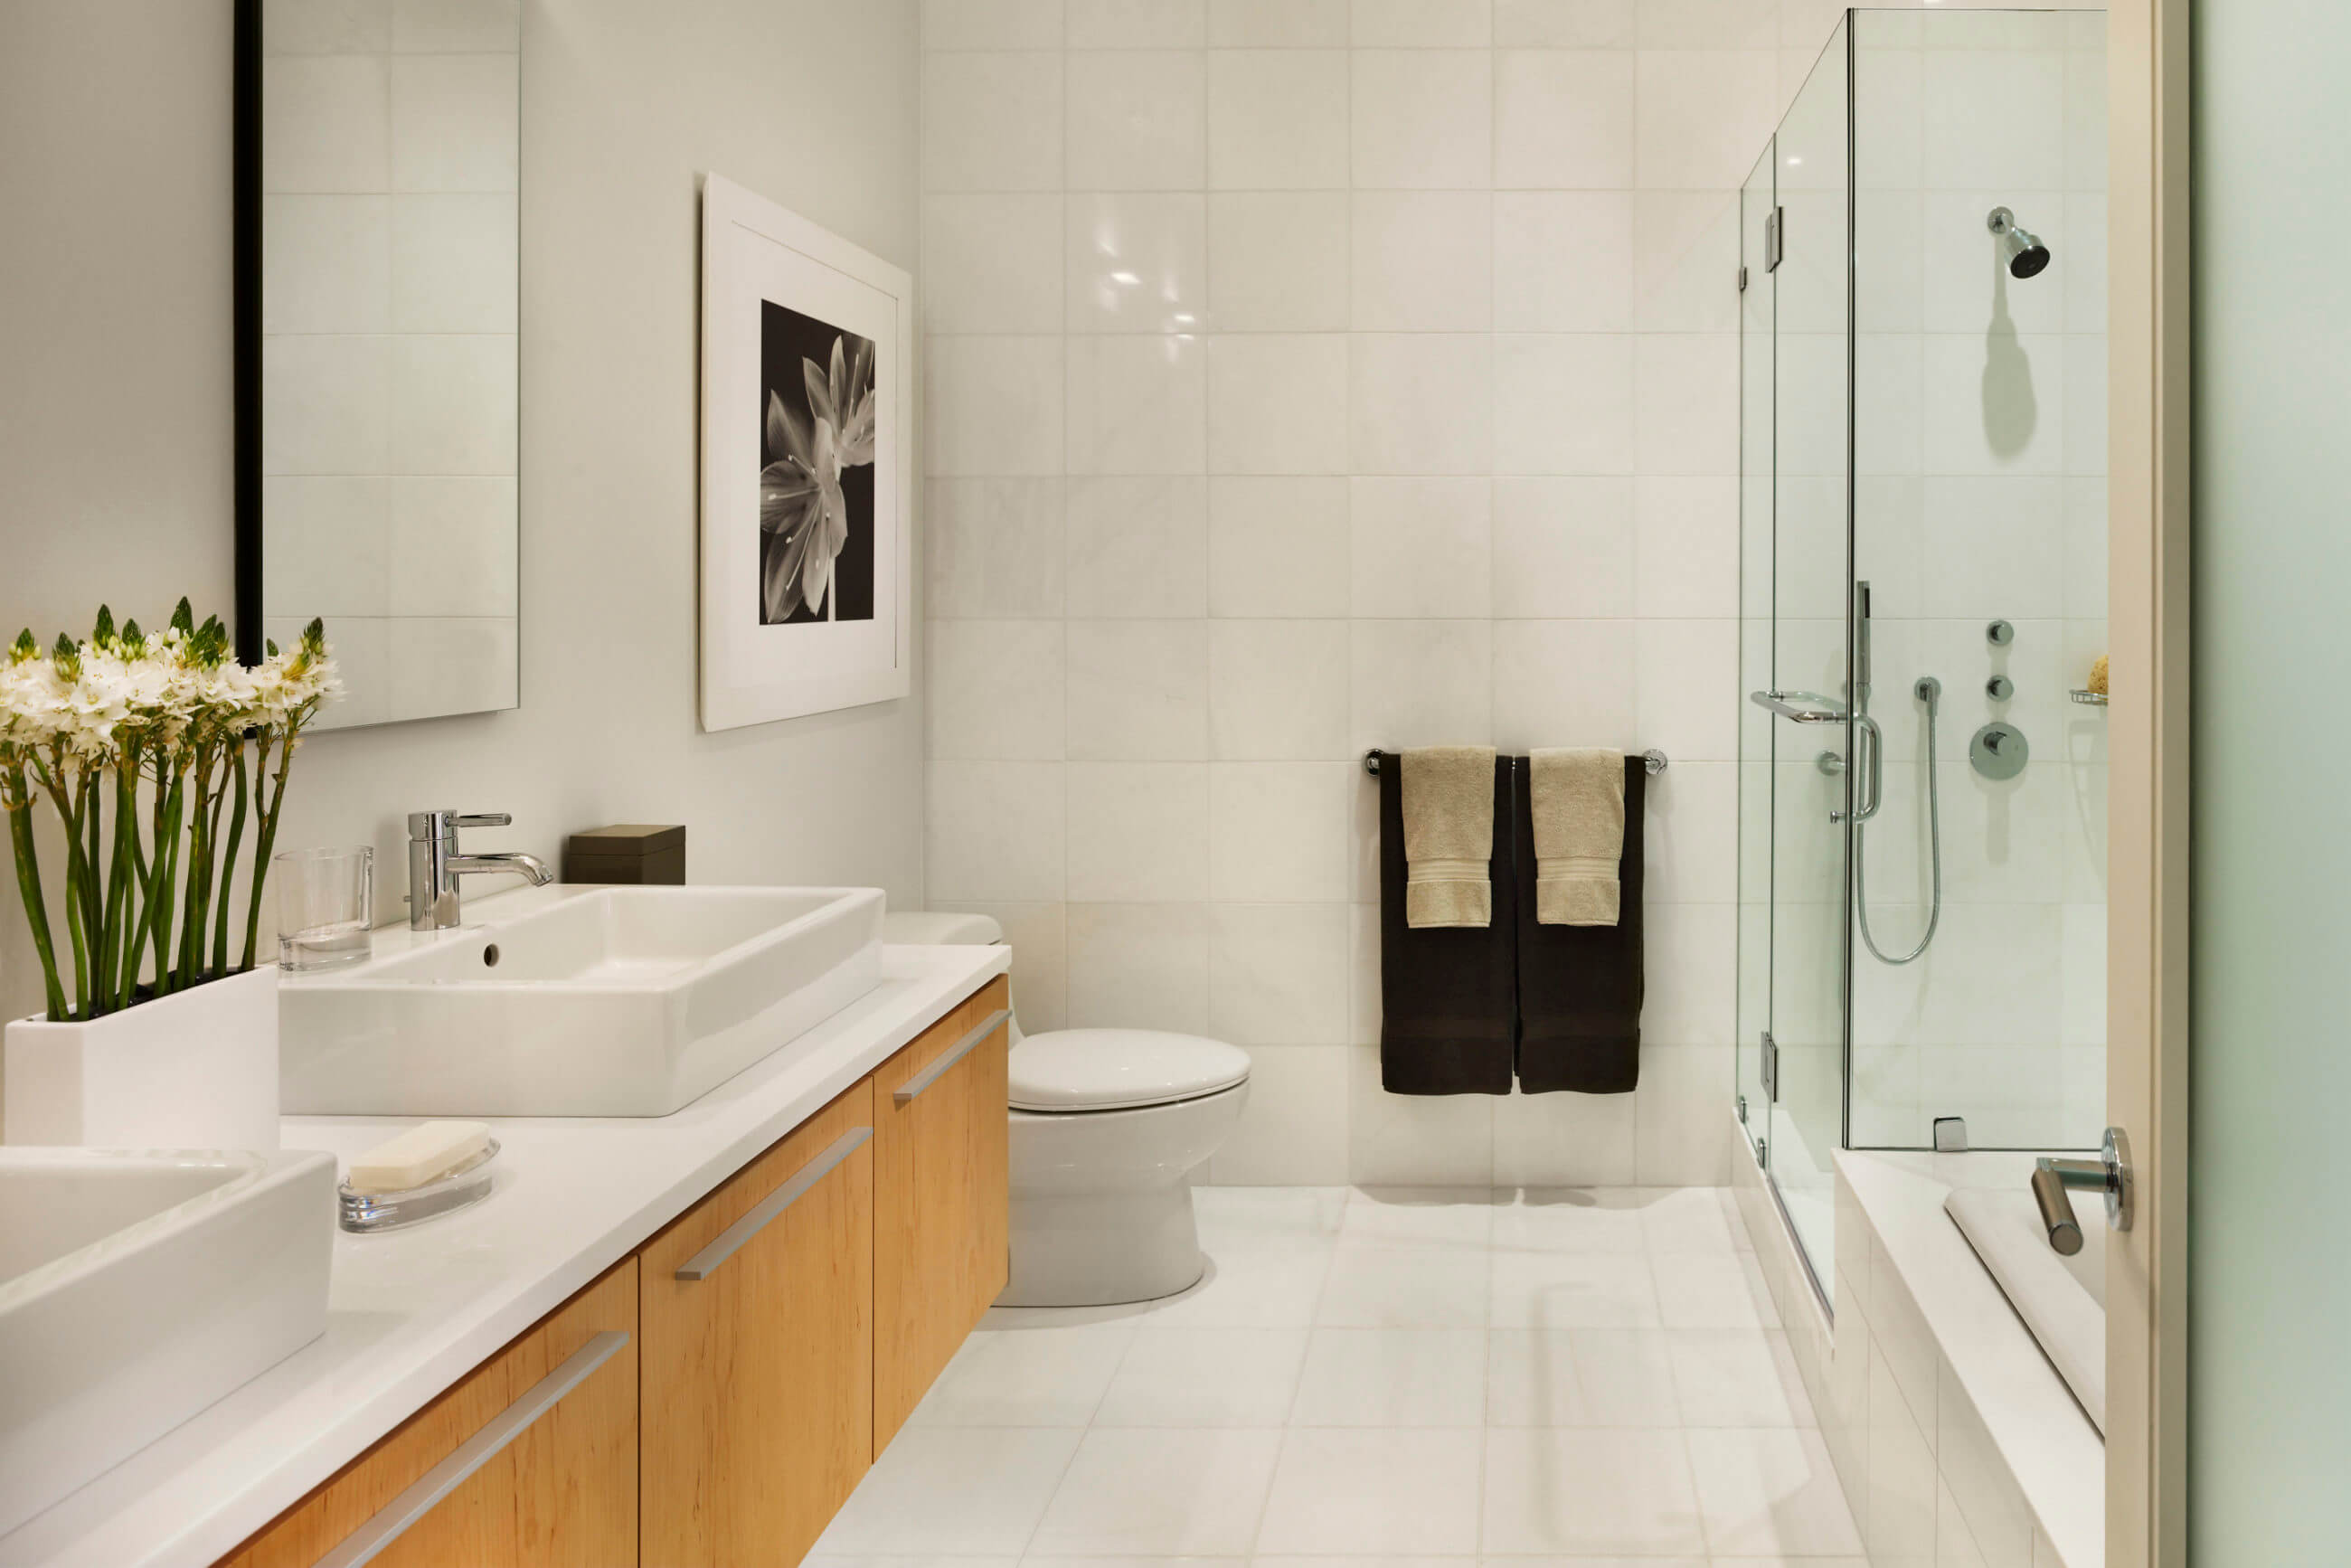 The Ayer bathrooms interiors